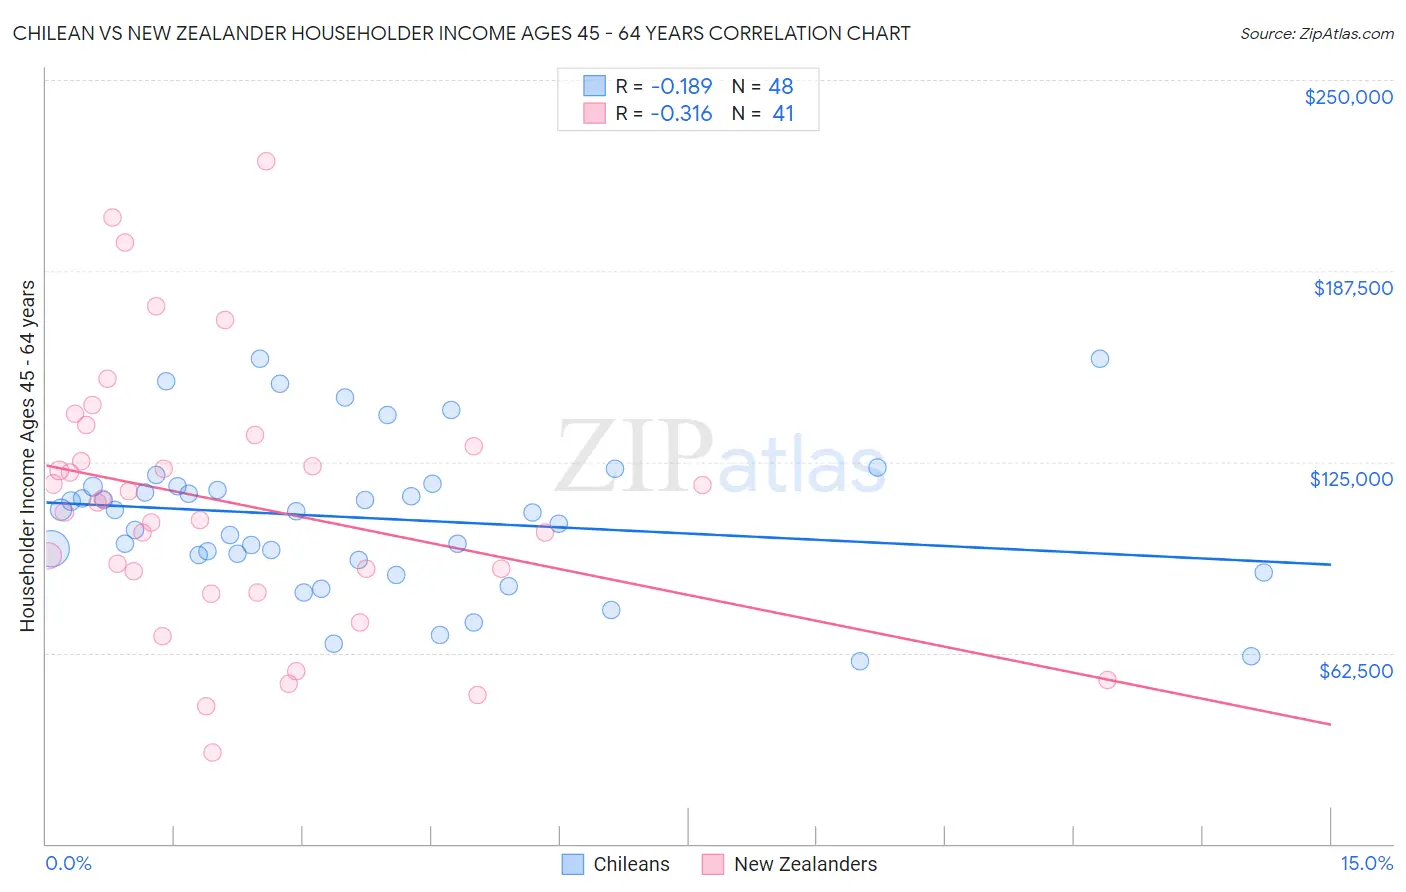 Chilean vs New Zealander Householder Income Ages 45 - 64 years